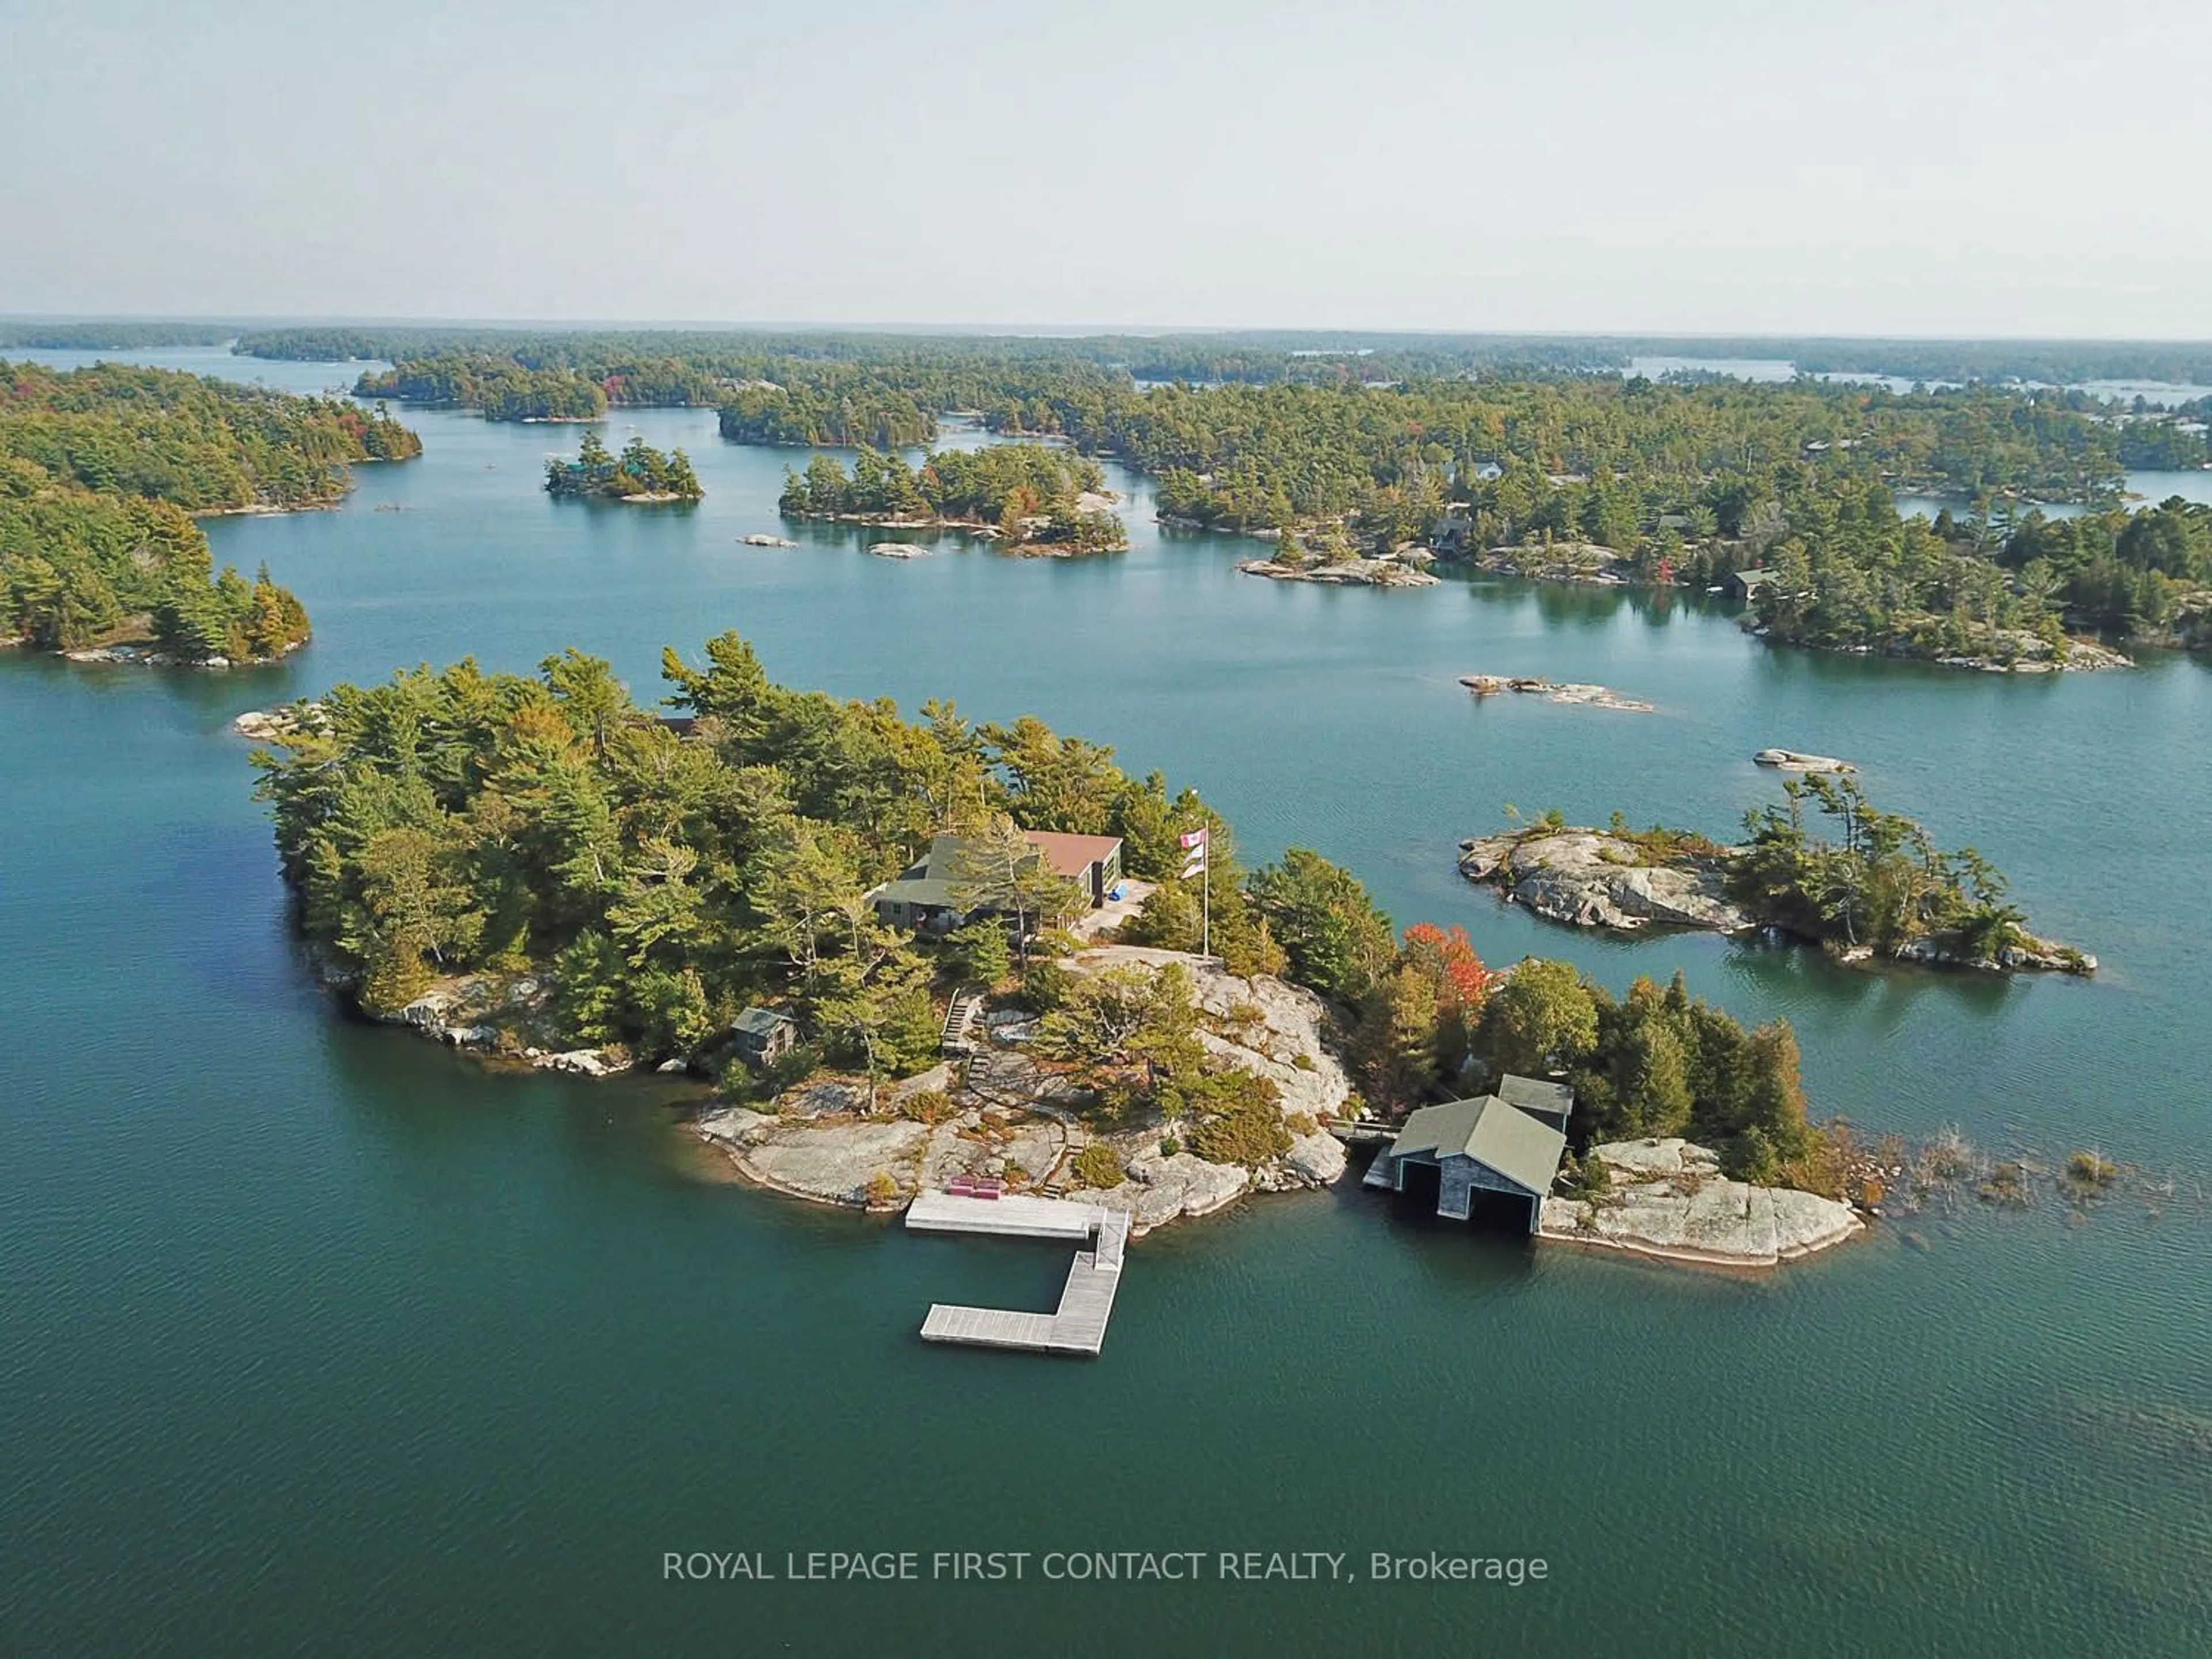 Lakeview for 1 A249 Island, The Archipelago Ontario P0G 1K0